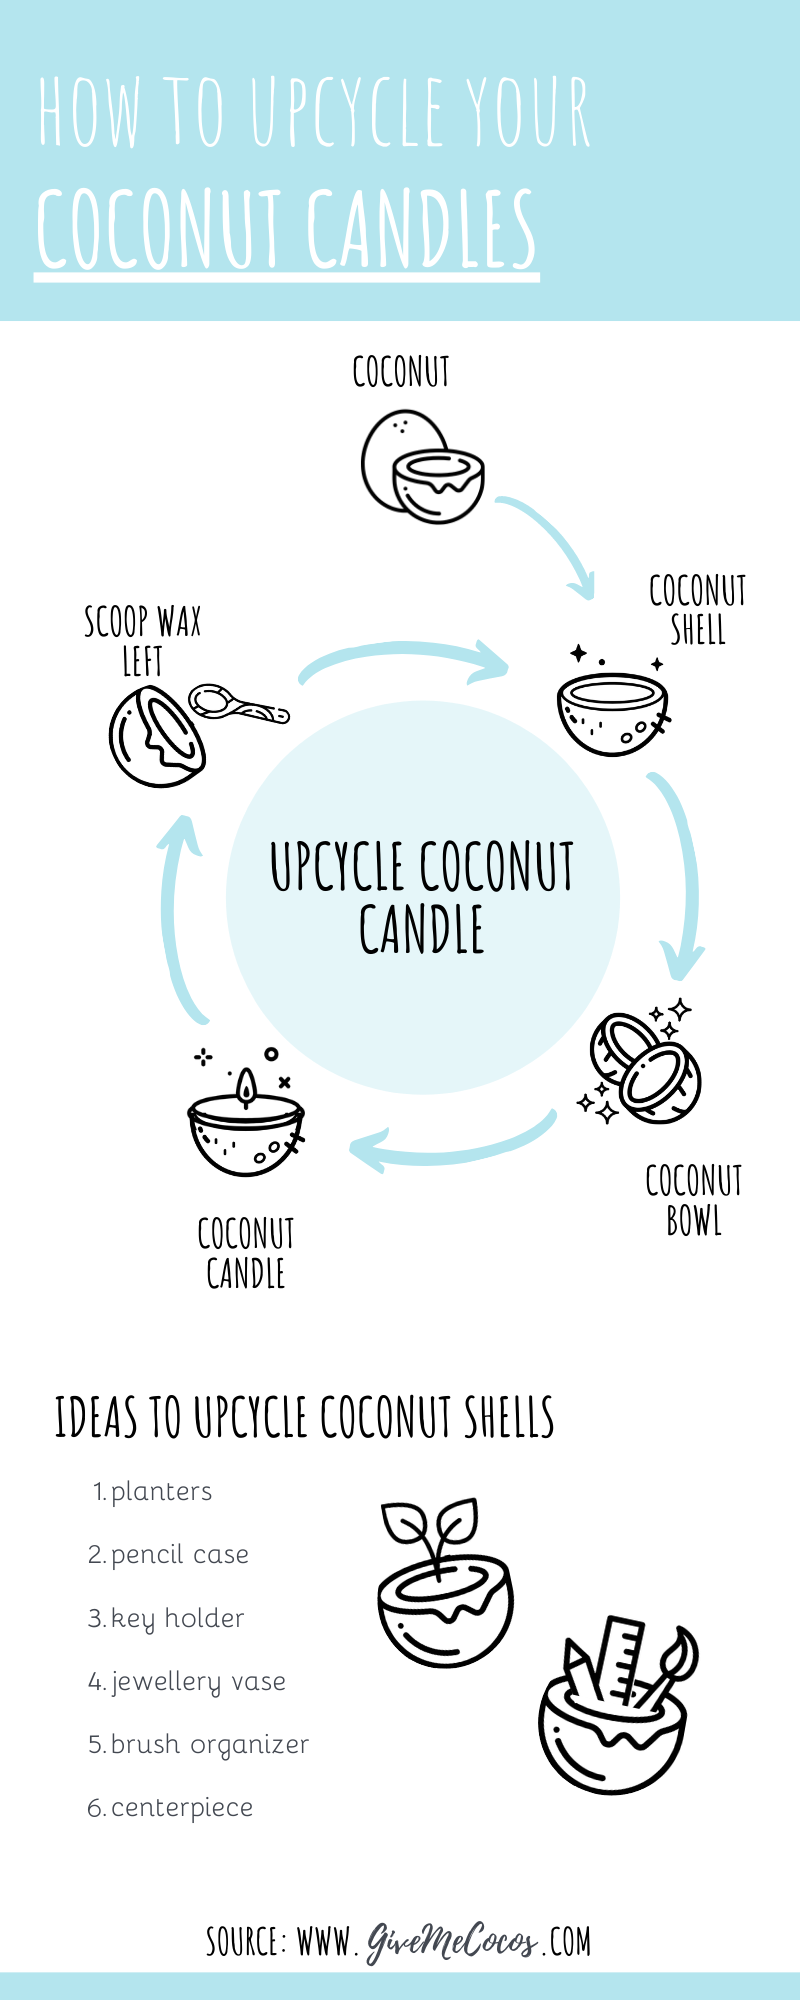 UPCYCLE YOUR GiveMeCocos CANDLES, Coconut Bowl, Coconut Shell